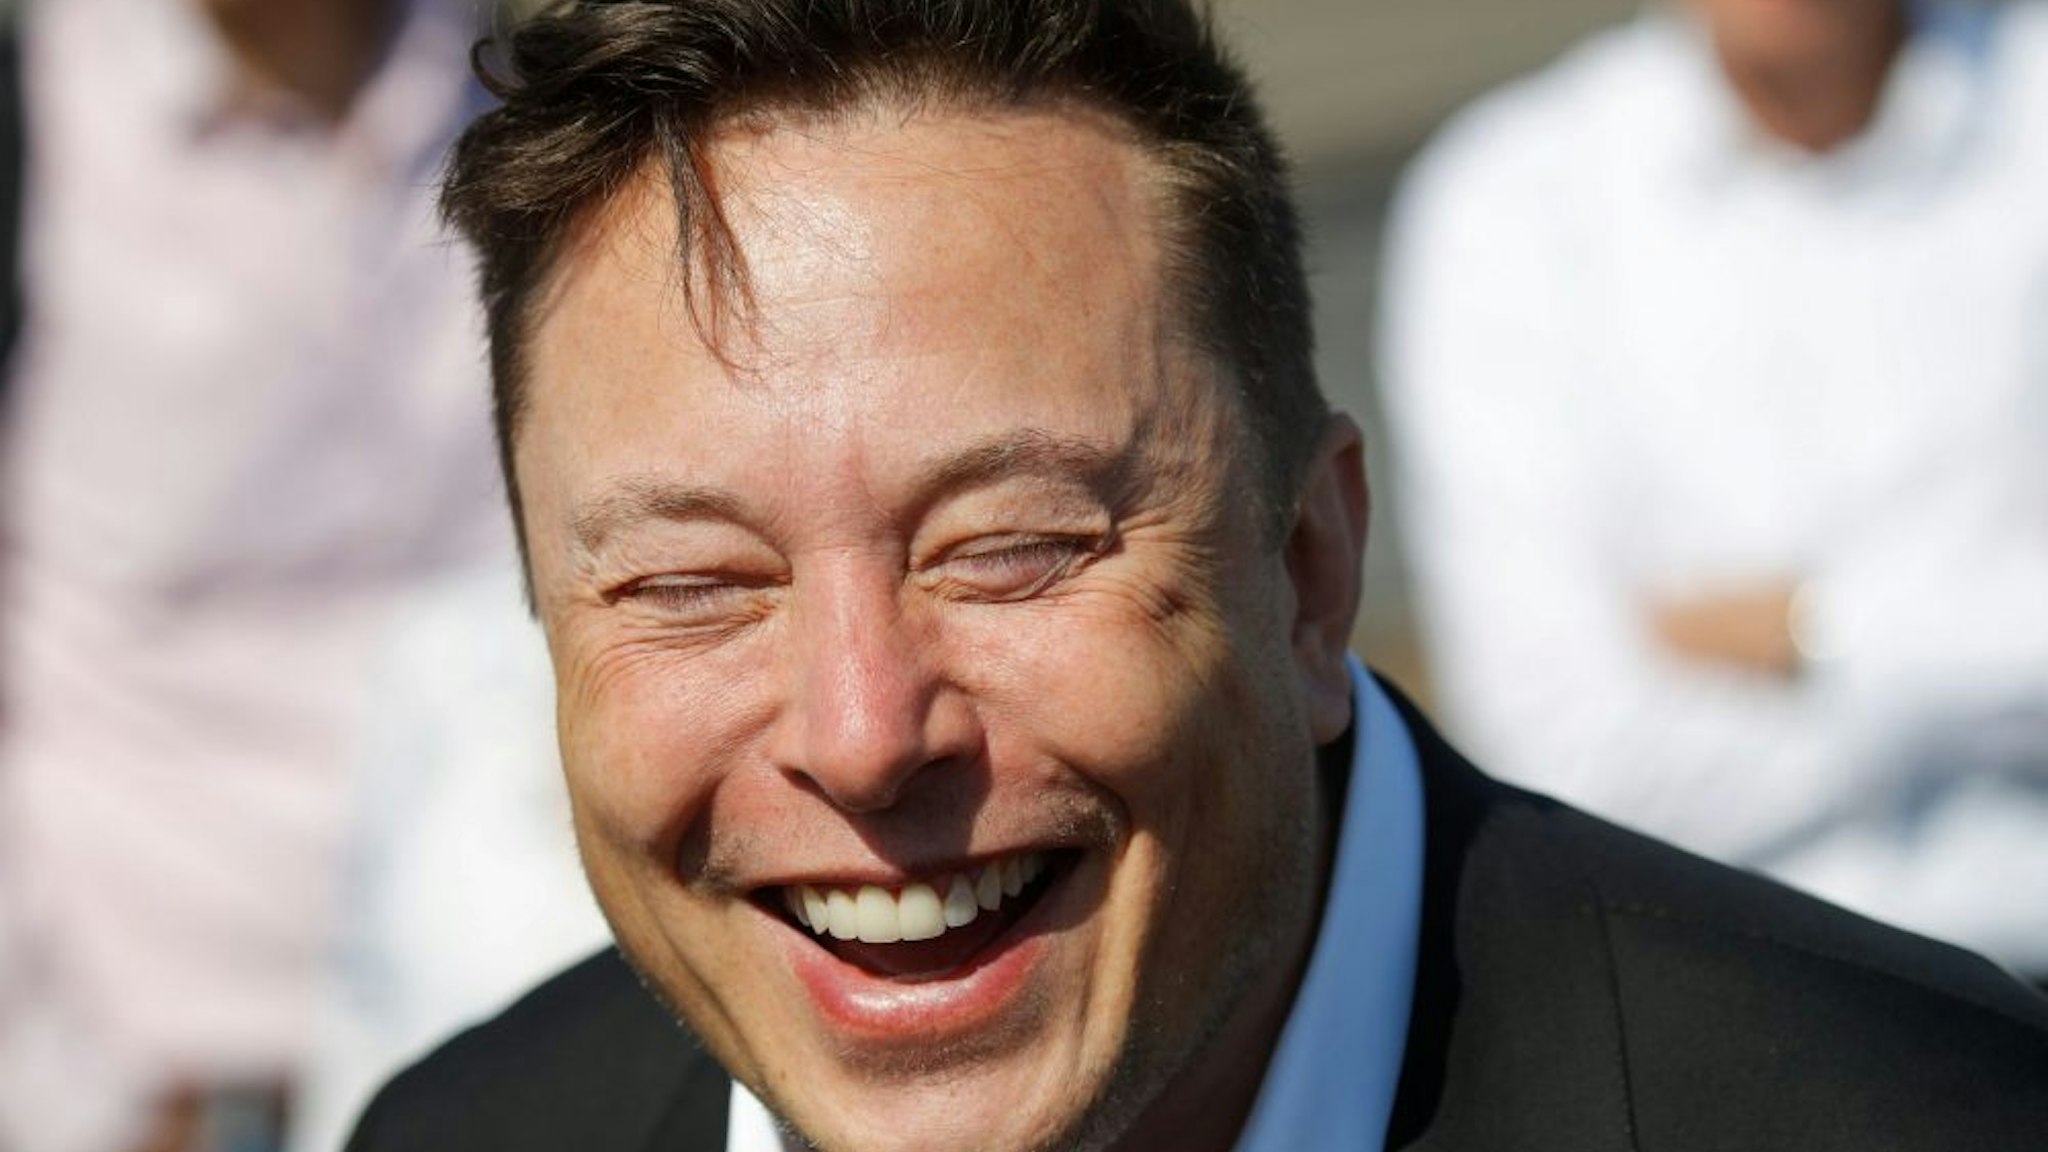 Tesla CEO Elon Musk laughs as he talks to media as he arrives to visit the construction site of the future US electric car giant Tesla, on September 03, 2020 in Gruenheide near Berlin. - Tesla builds a compound at the site in Gruenheide in Brandenburg for its first European "Gigafactory" near Berlin.